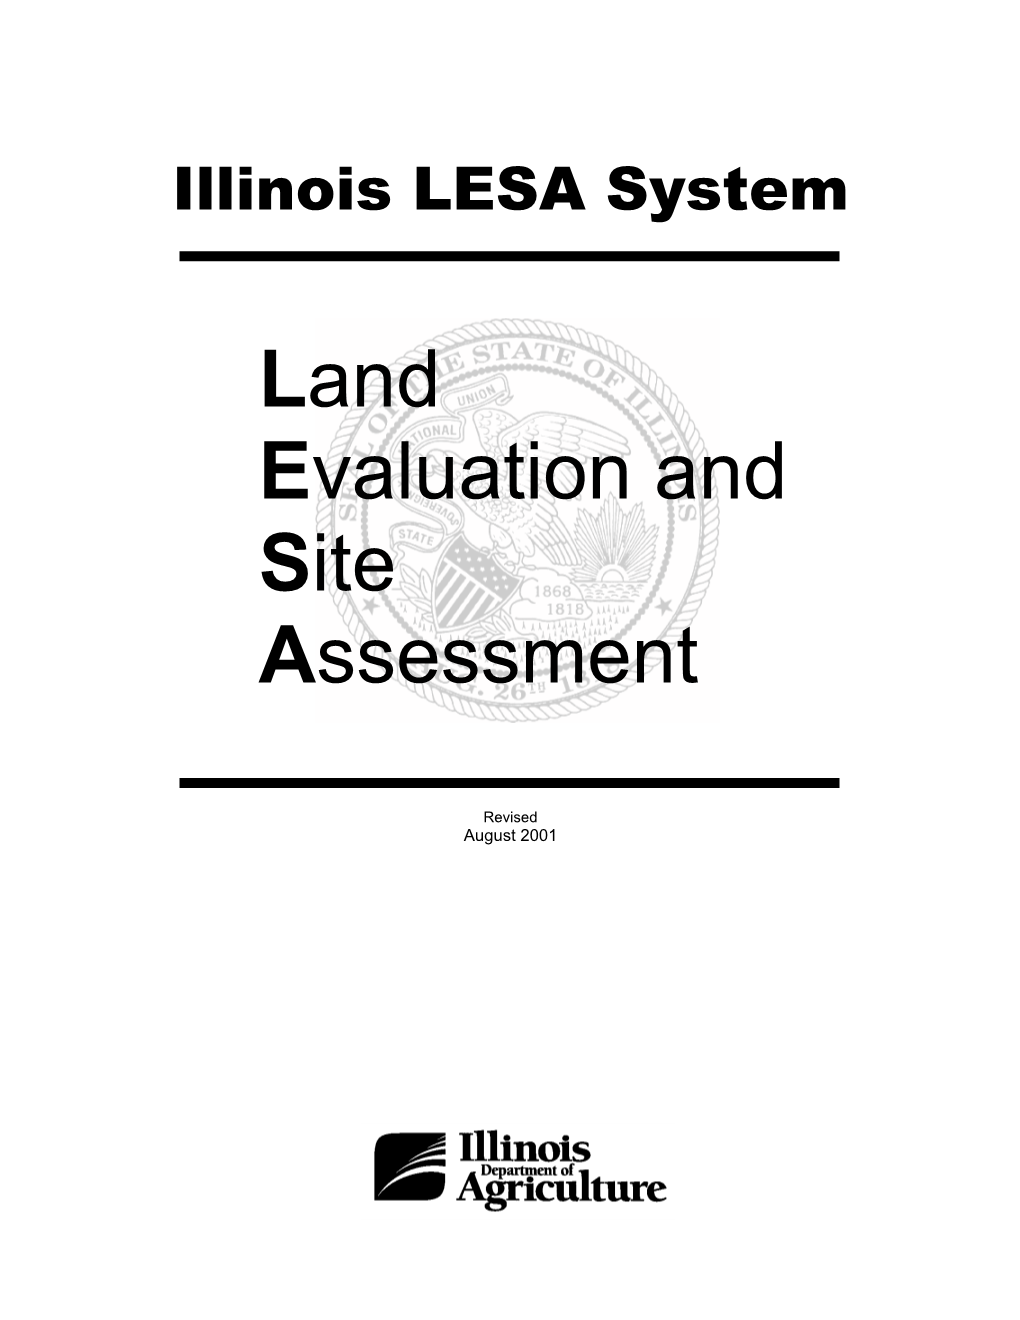 Land Evaluation and Site Assessment System